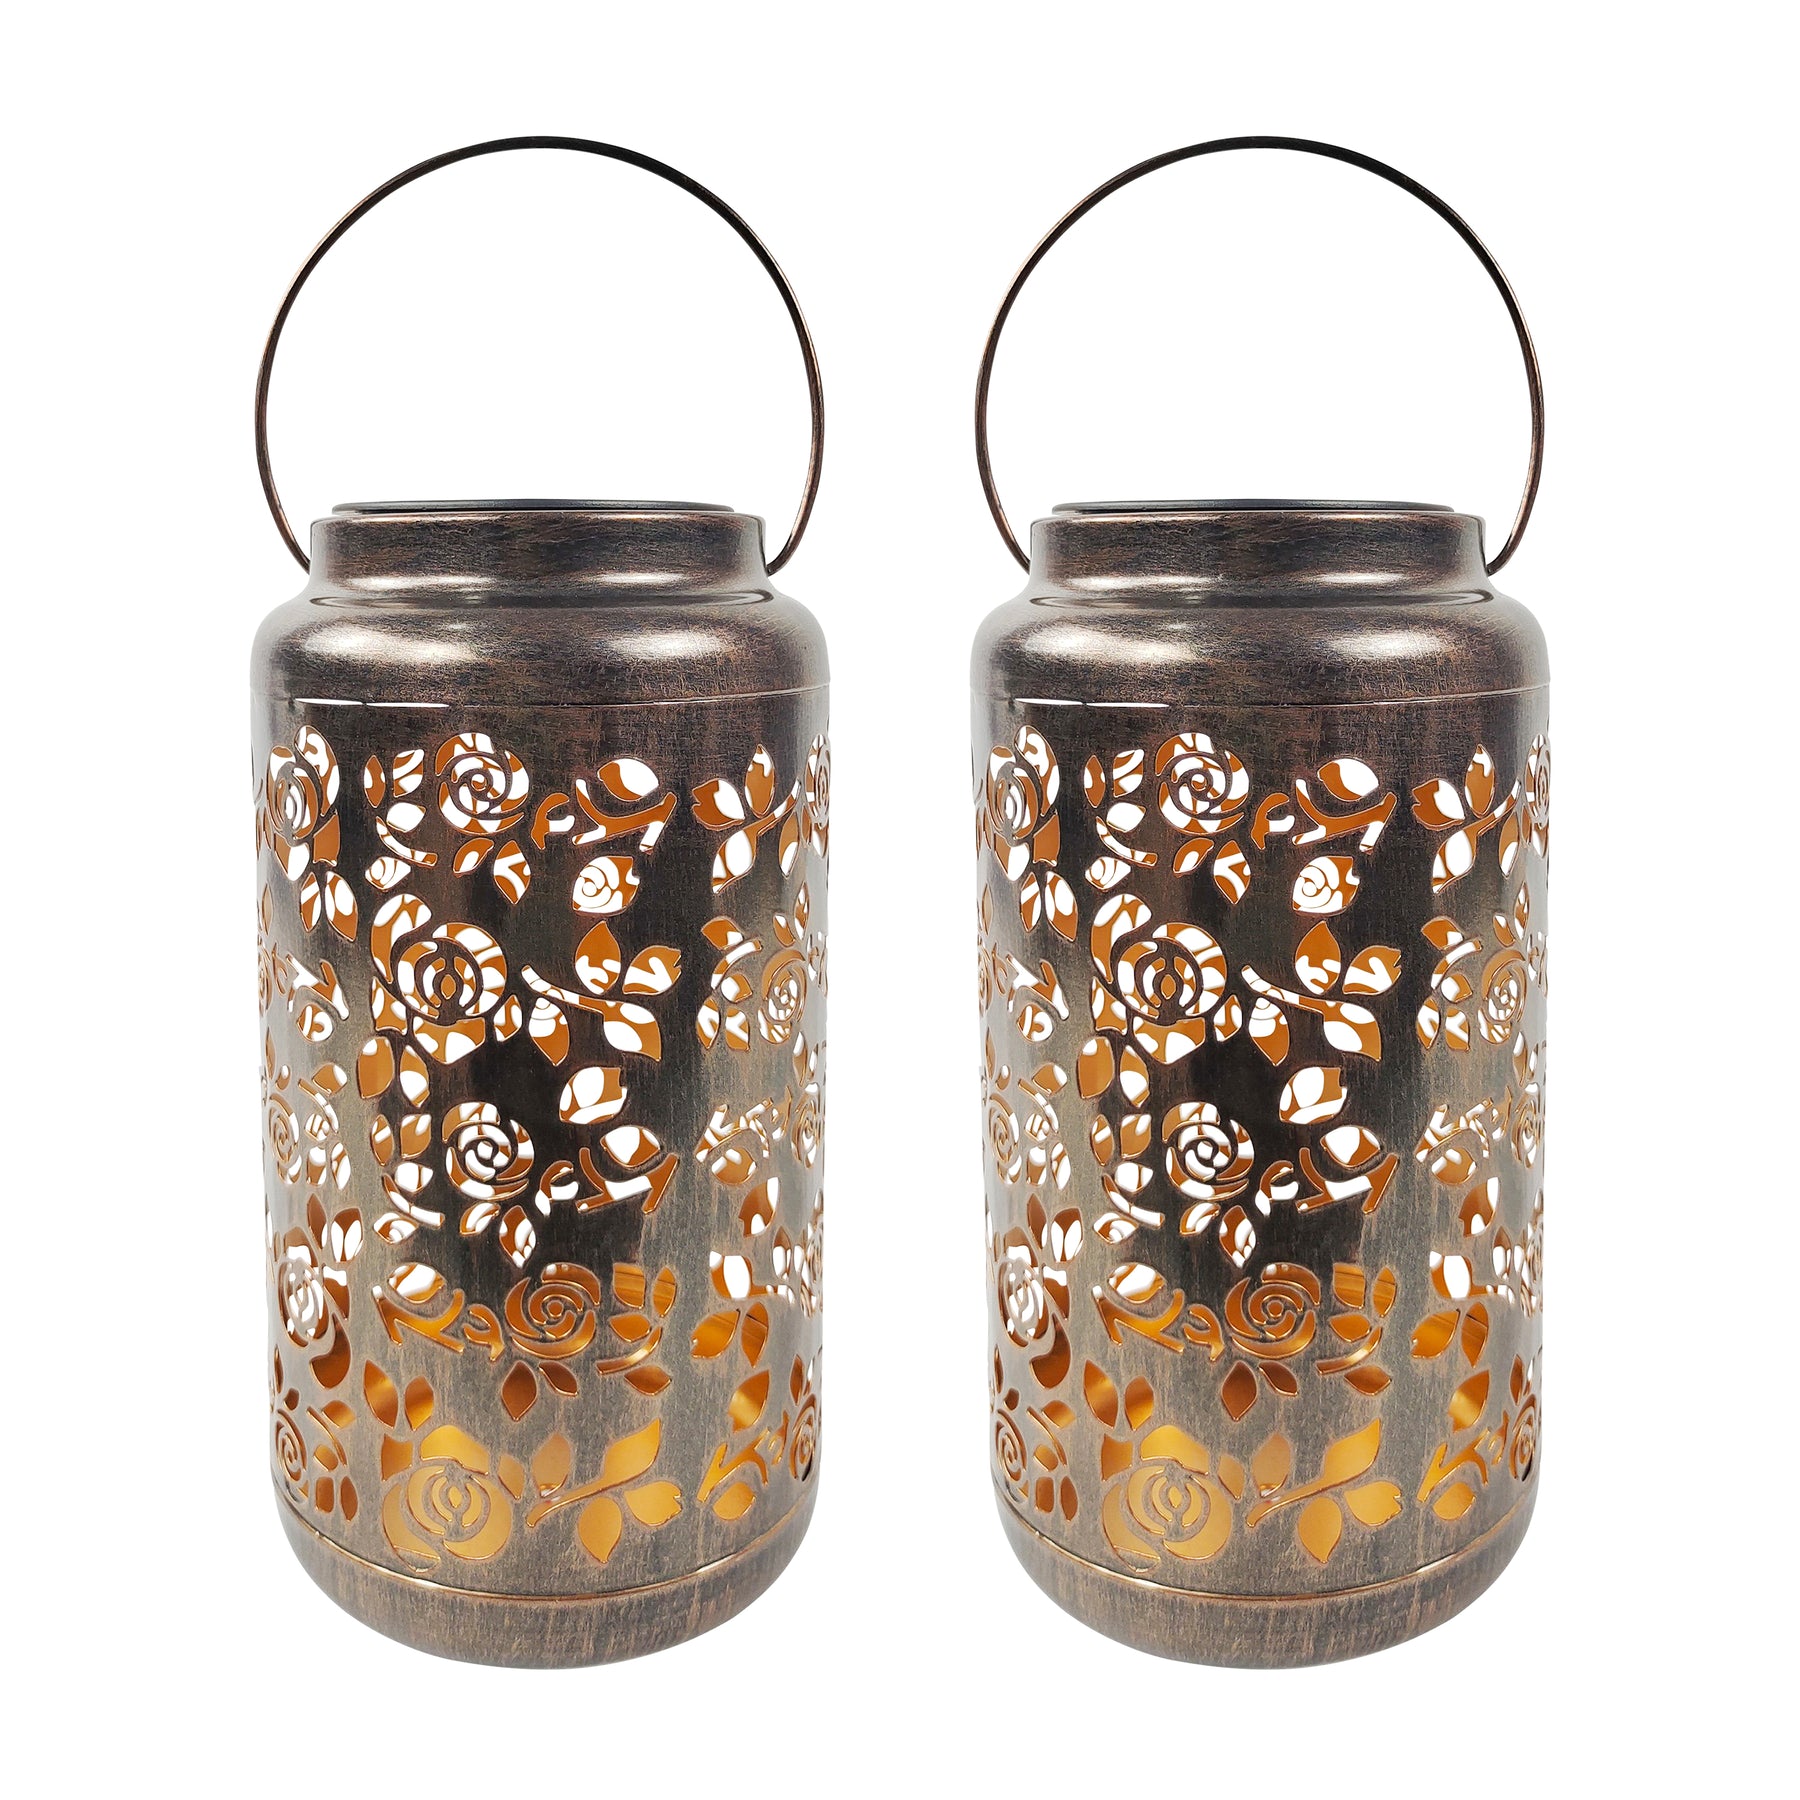 Bliss Outdoors 9-inch Tall 2-Pack Hanging and Tabletop Decorative Solar LED Lantern w/ Unique Rose Design and Antique Hand Painted Finish in the brushed bronze variation.